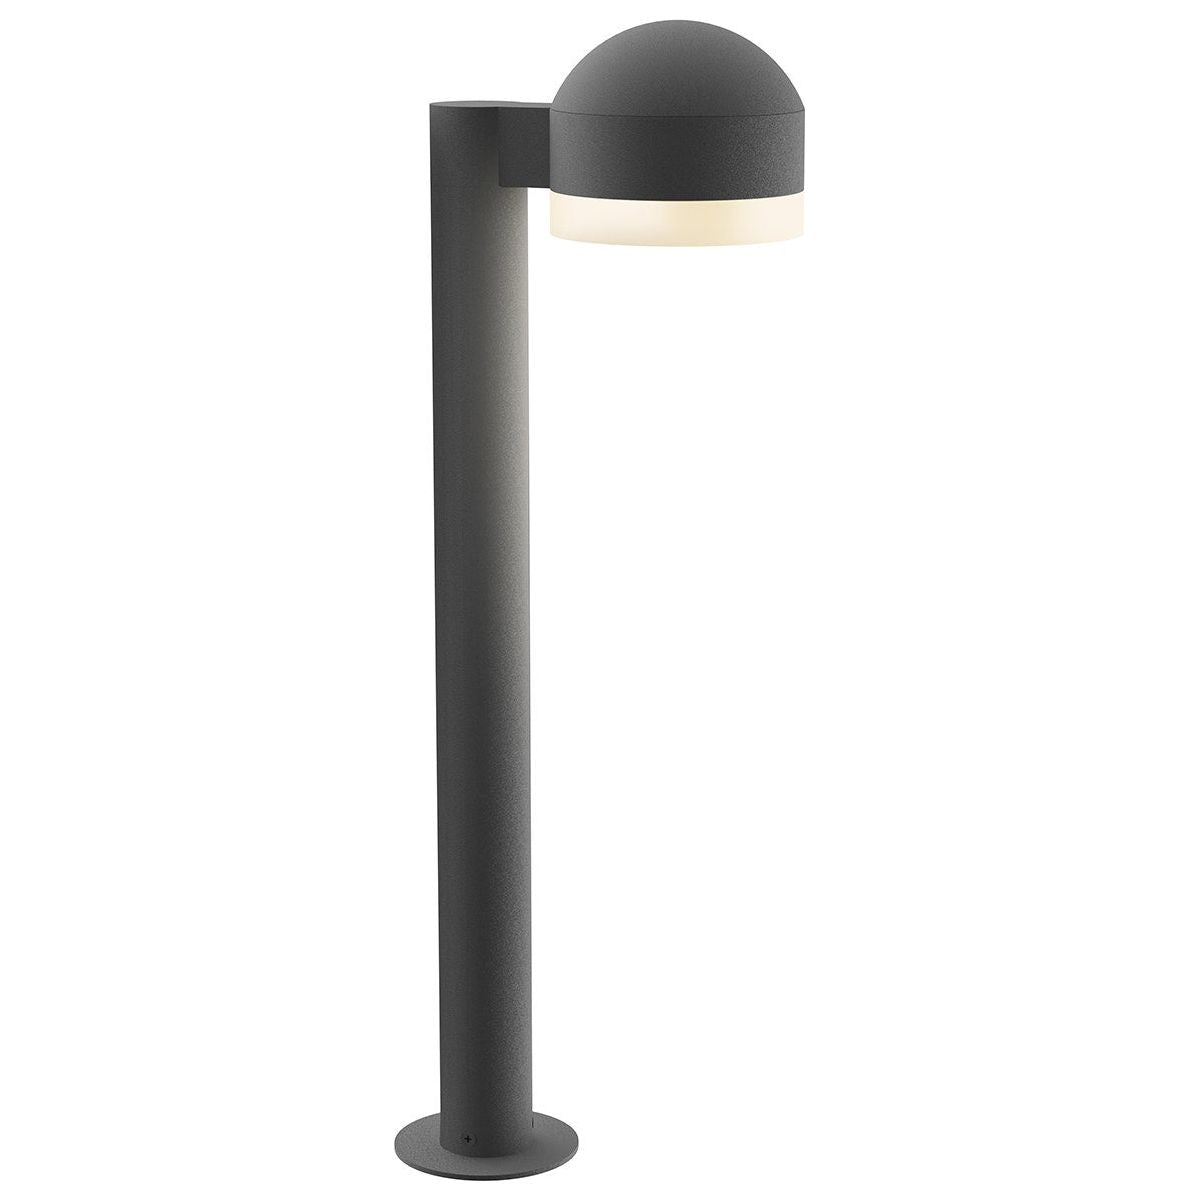 REALS 22" LED Bollard with Dome Cap and Cylinder Lens